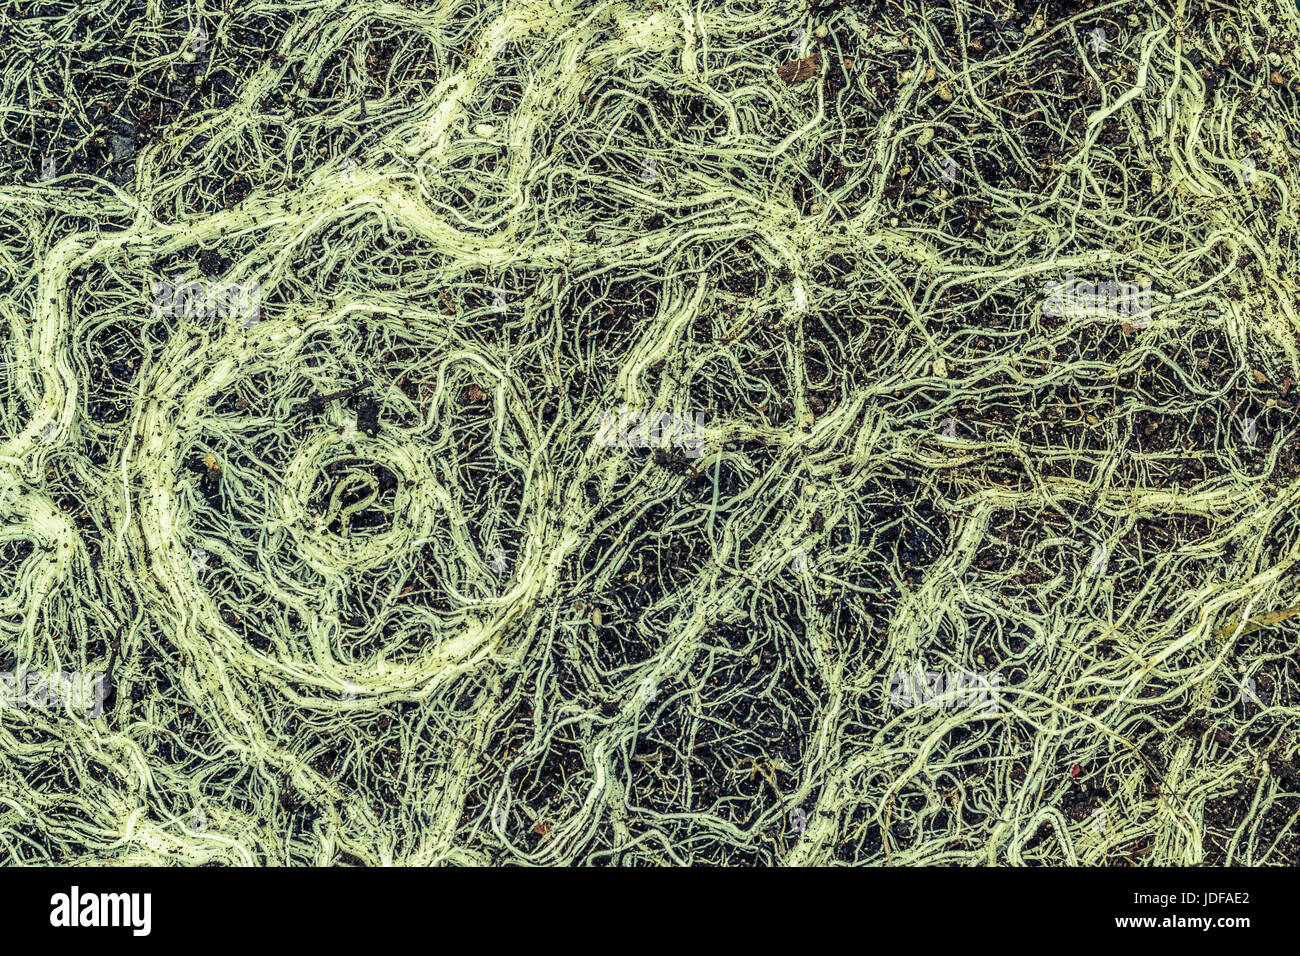 Semi-abstract of roots and soil from an upturned container plant, connected by a dense, almost invisible fungal mycelium network. Stock Photo